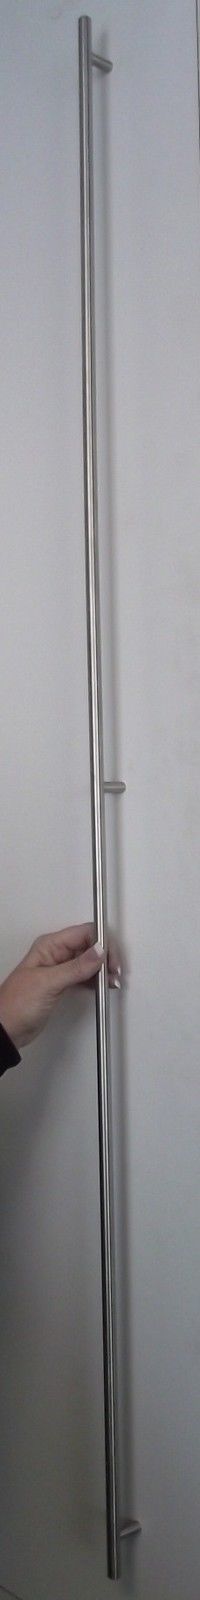 Knob Hill P02111V-SS-C 54-3/4" Stainless Steel Bar Pull Handle